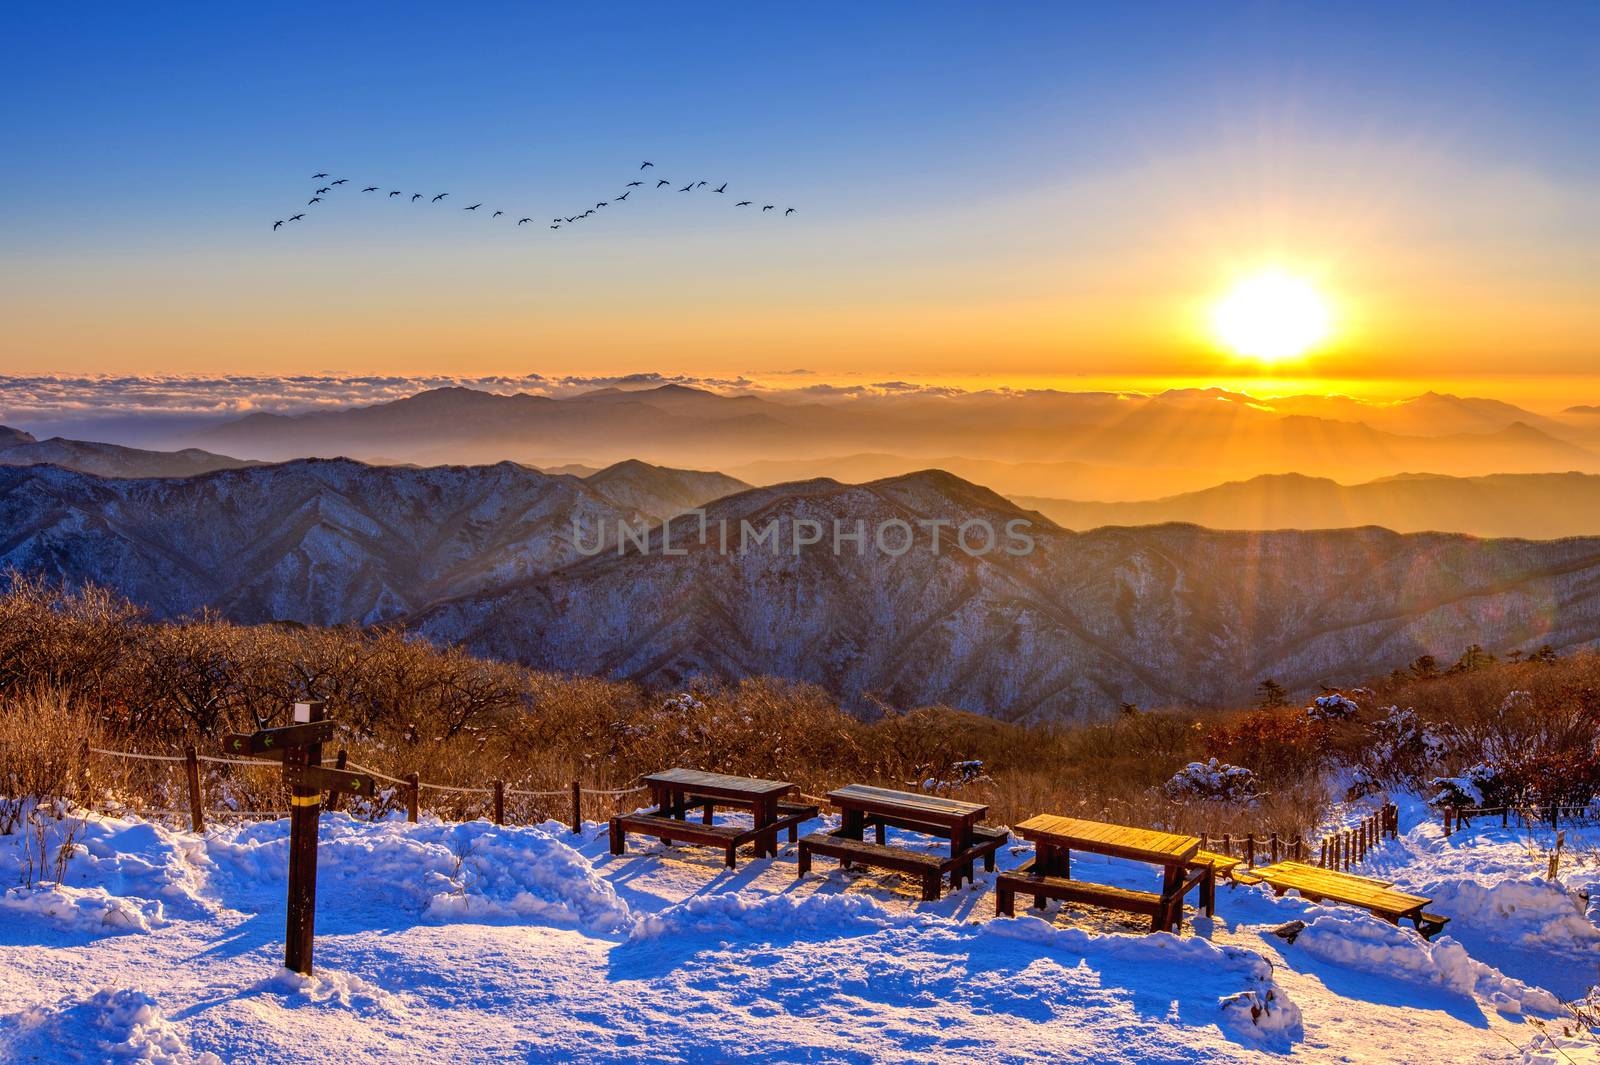 Sunrise with beautiful Lens Flare and silhouettes of birds at Deogyusan mountains in winter,South Korea.